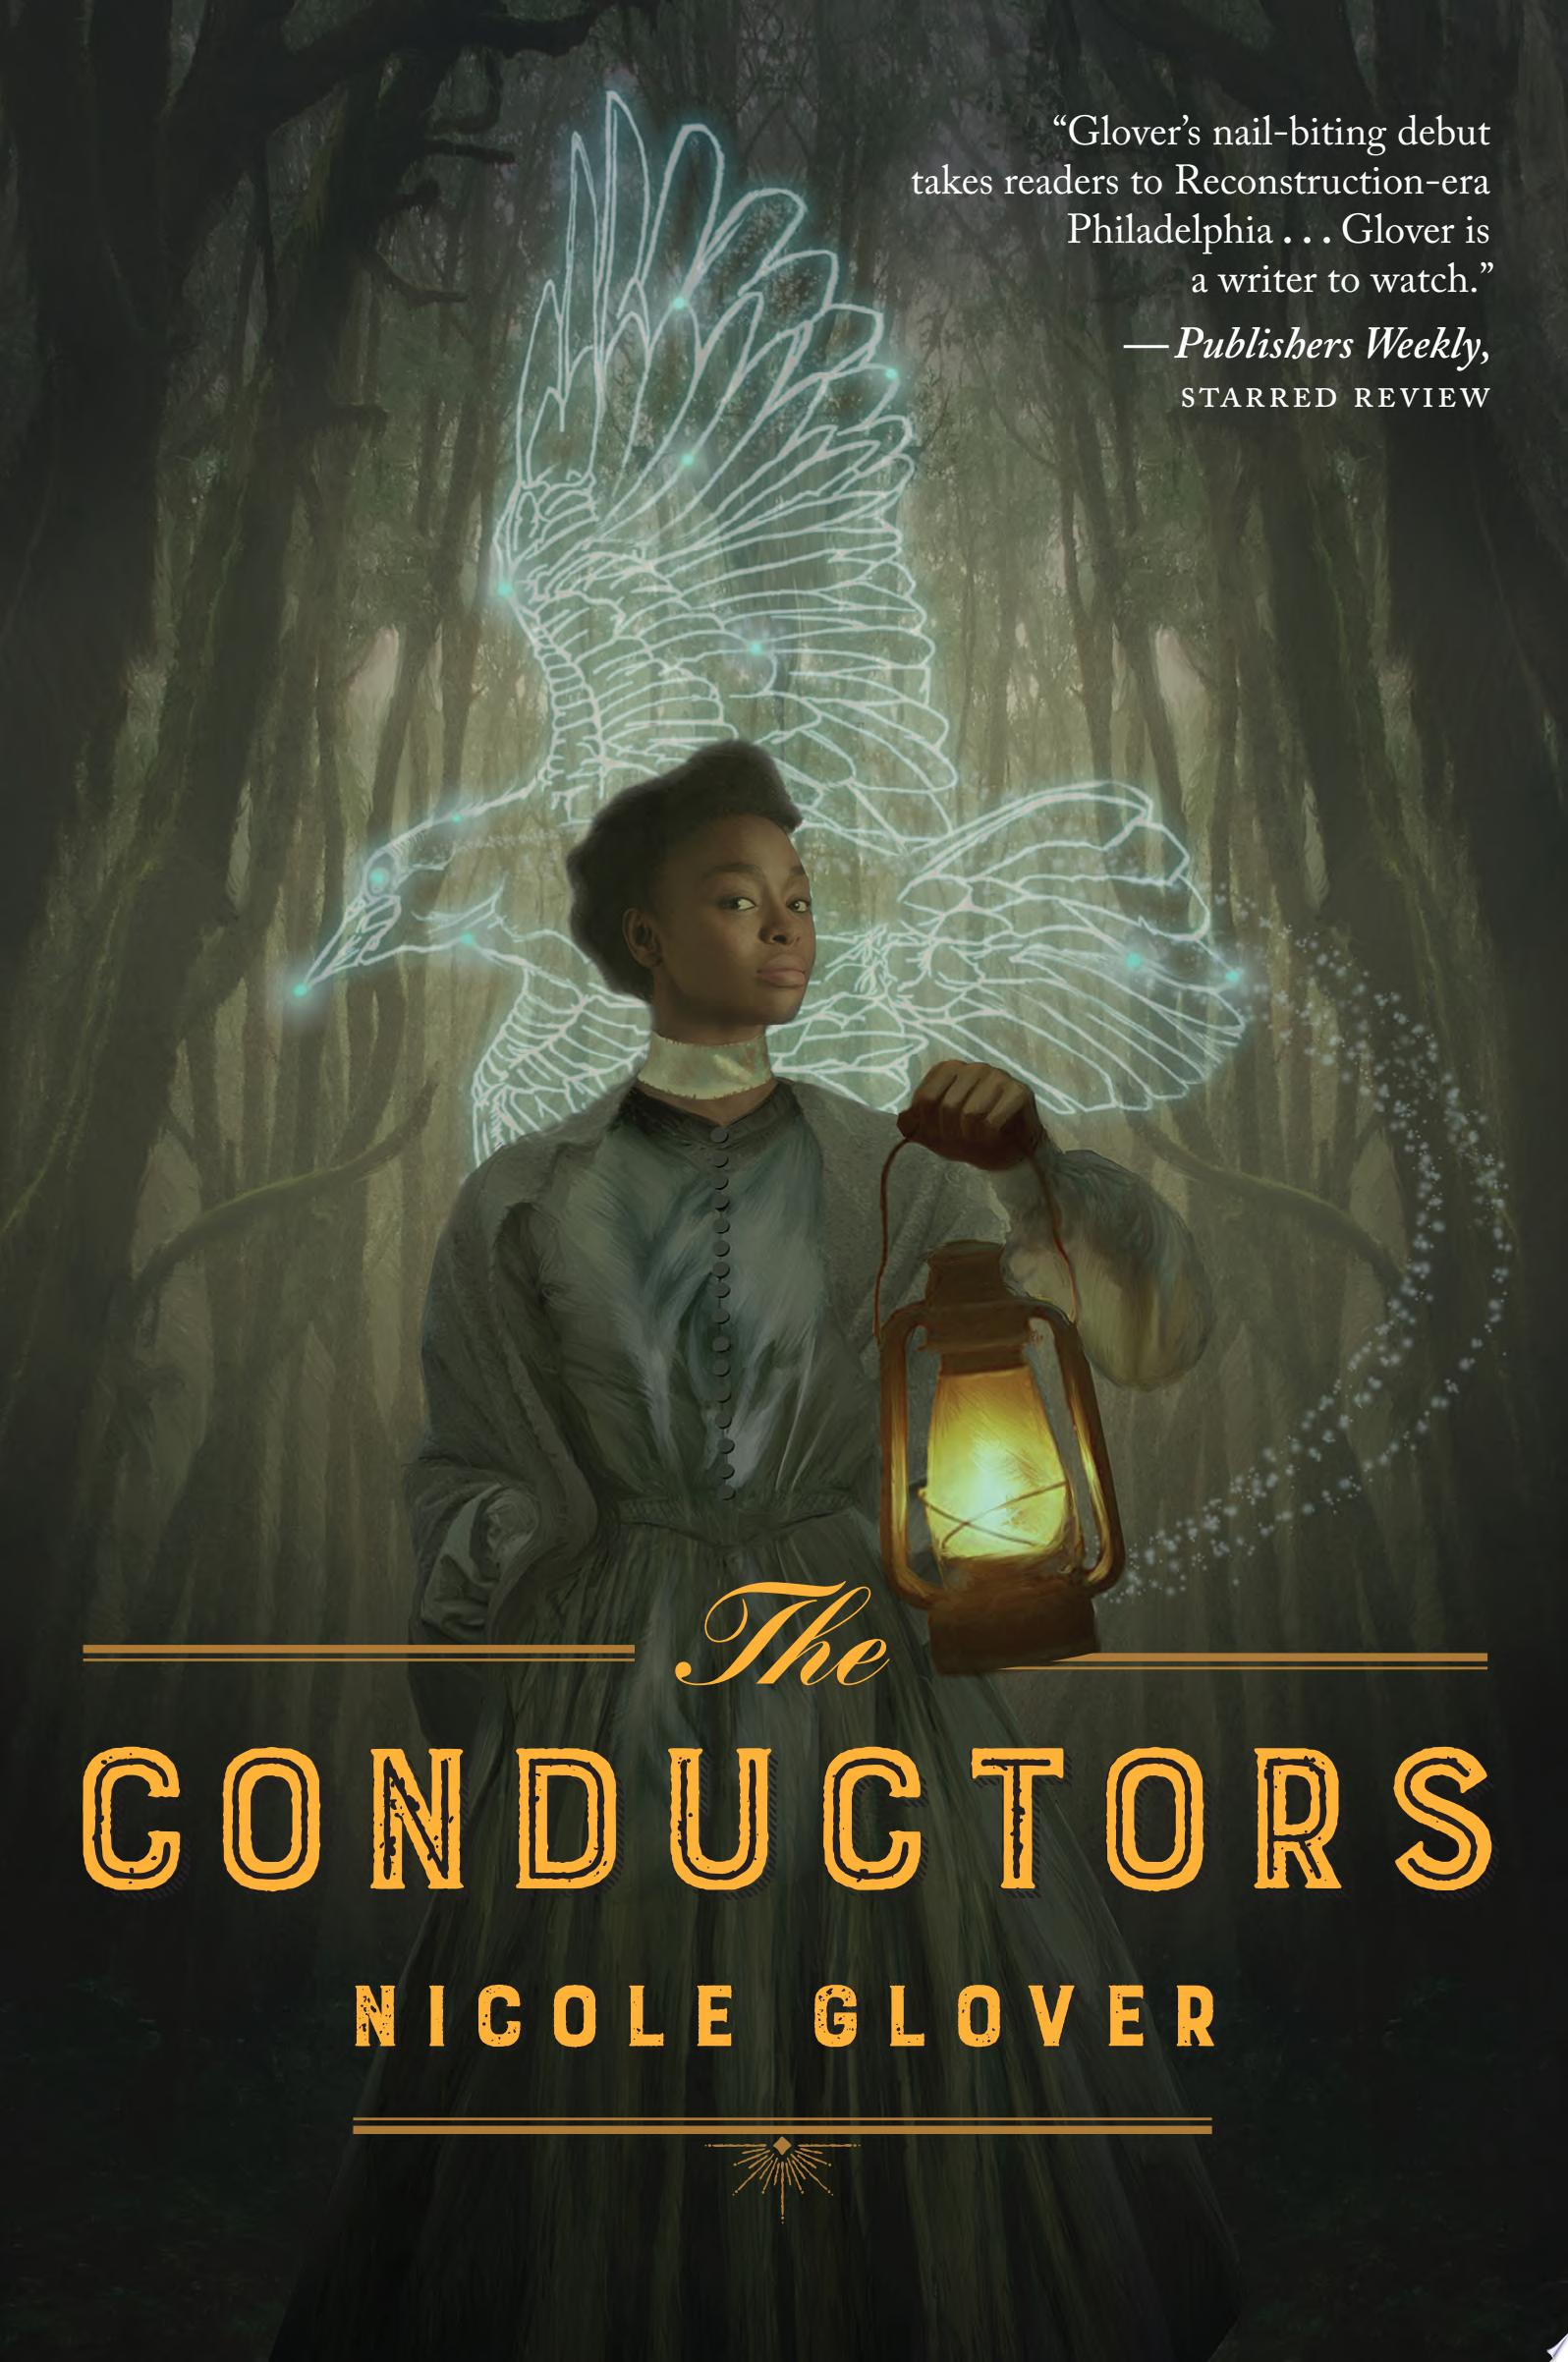 Image for "The Conductors"